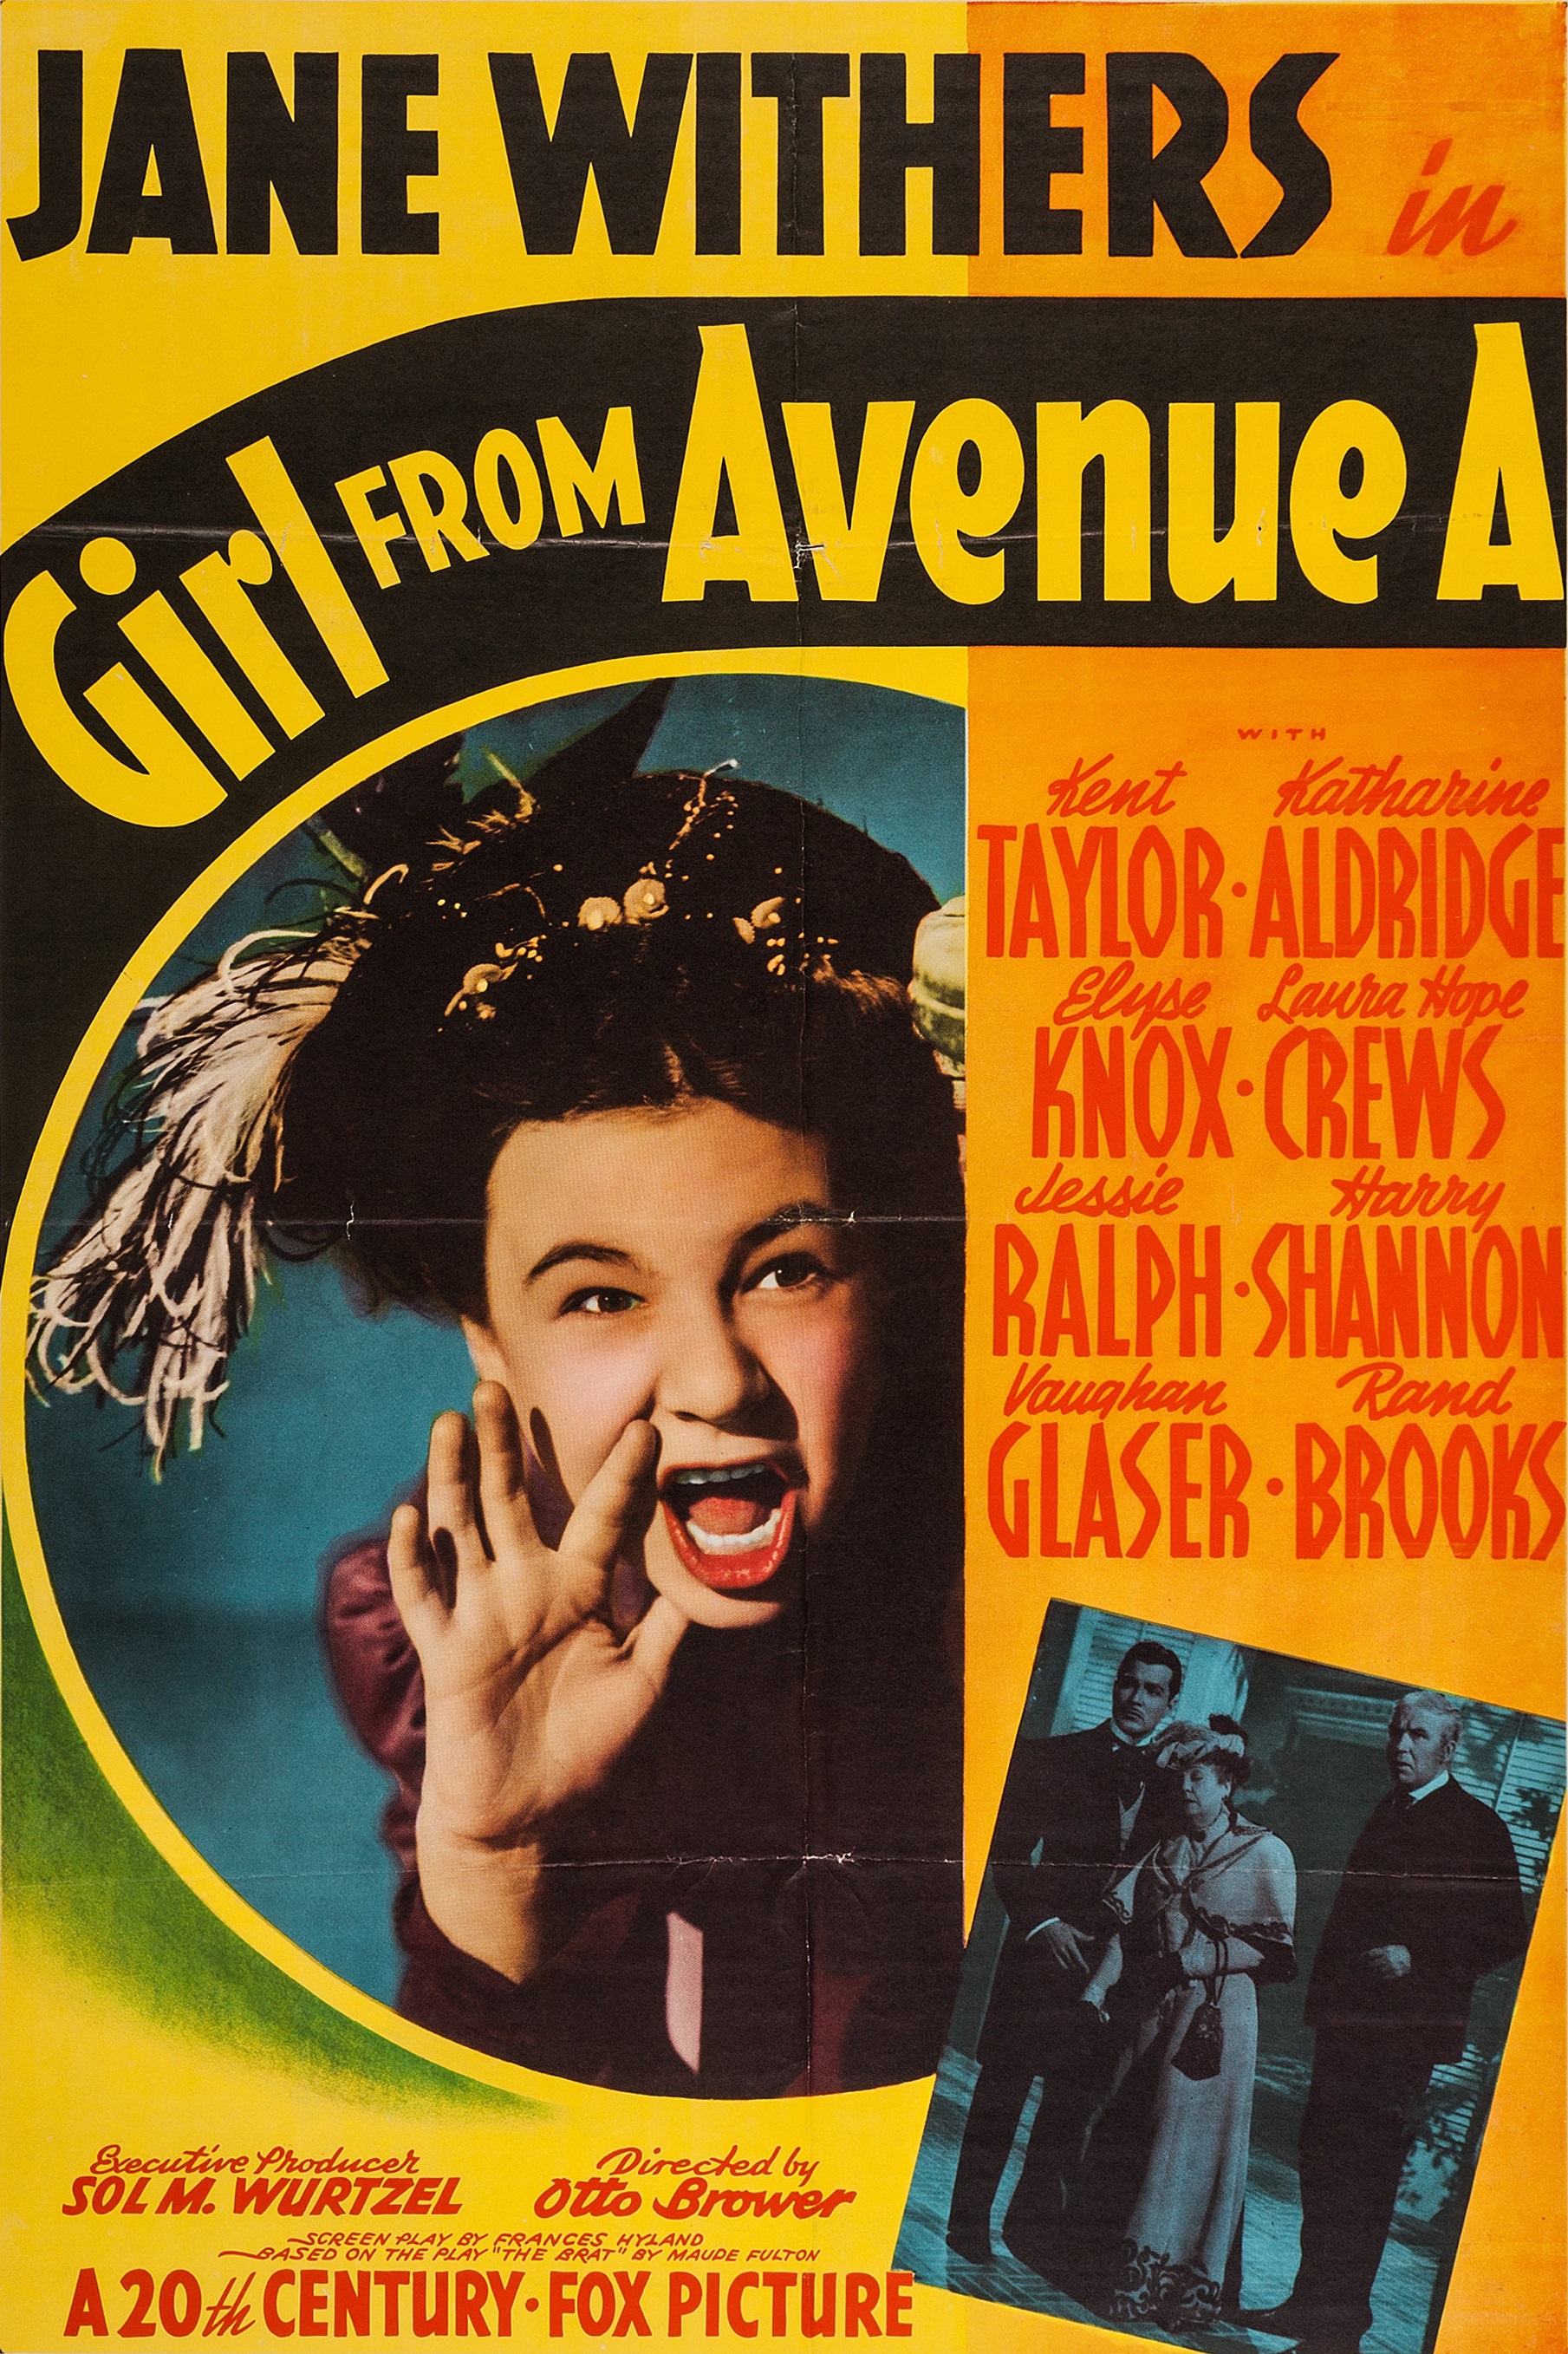 Girl from Avenue A